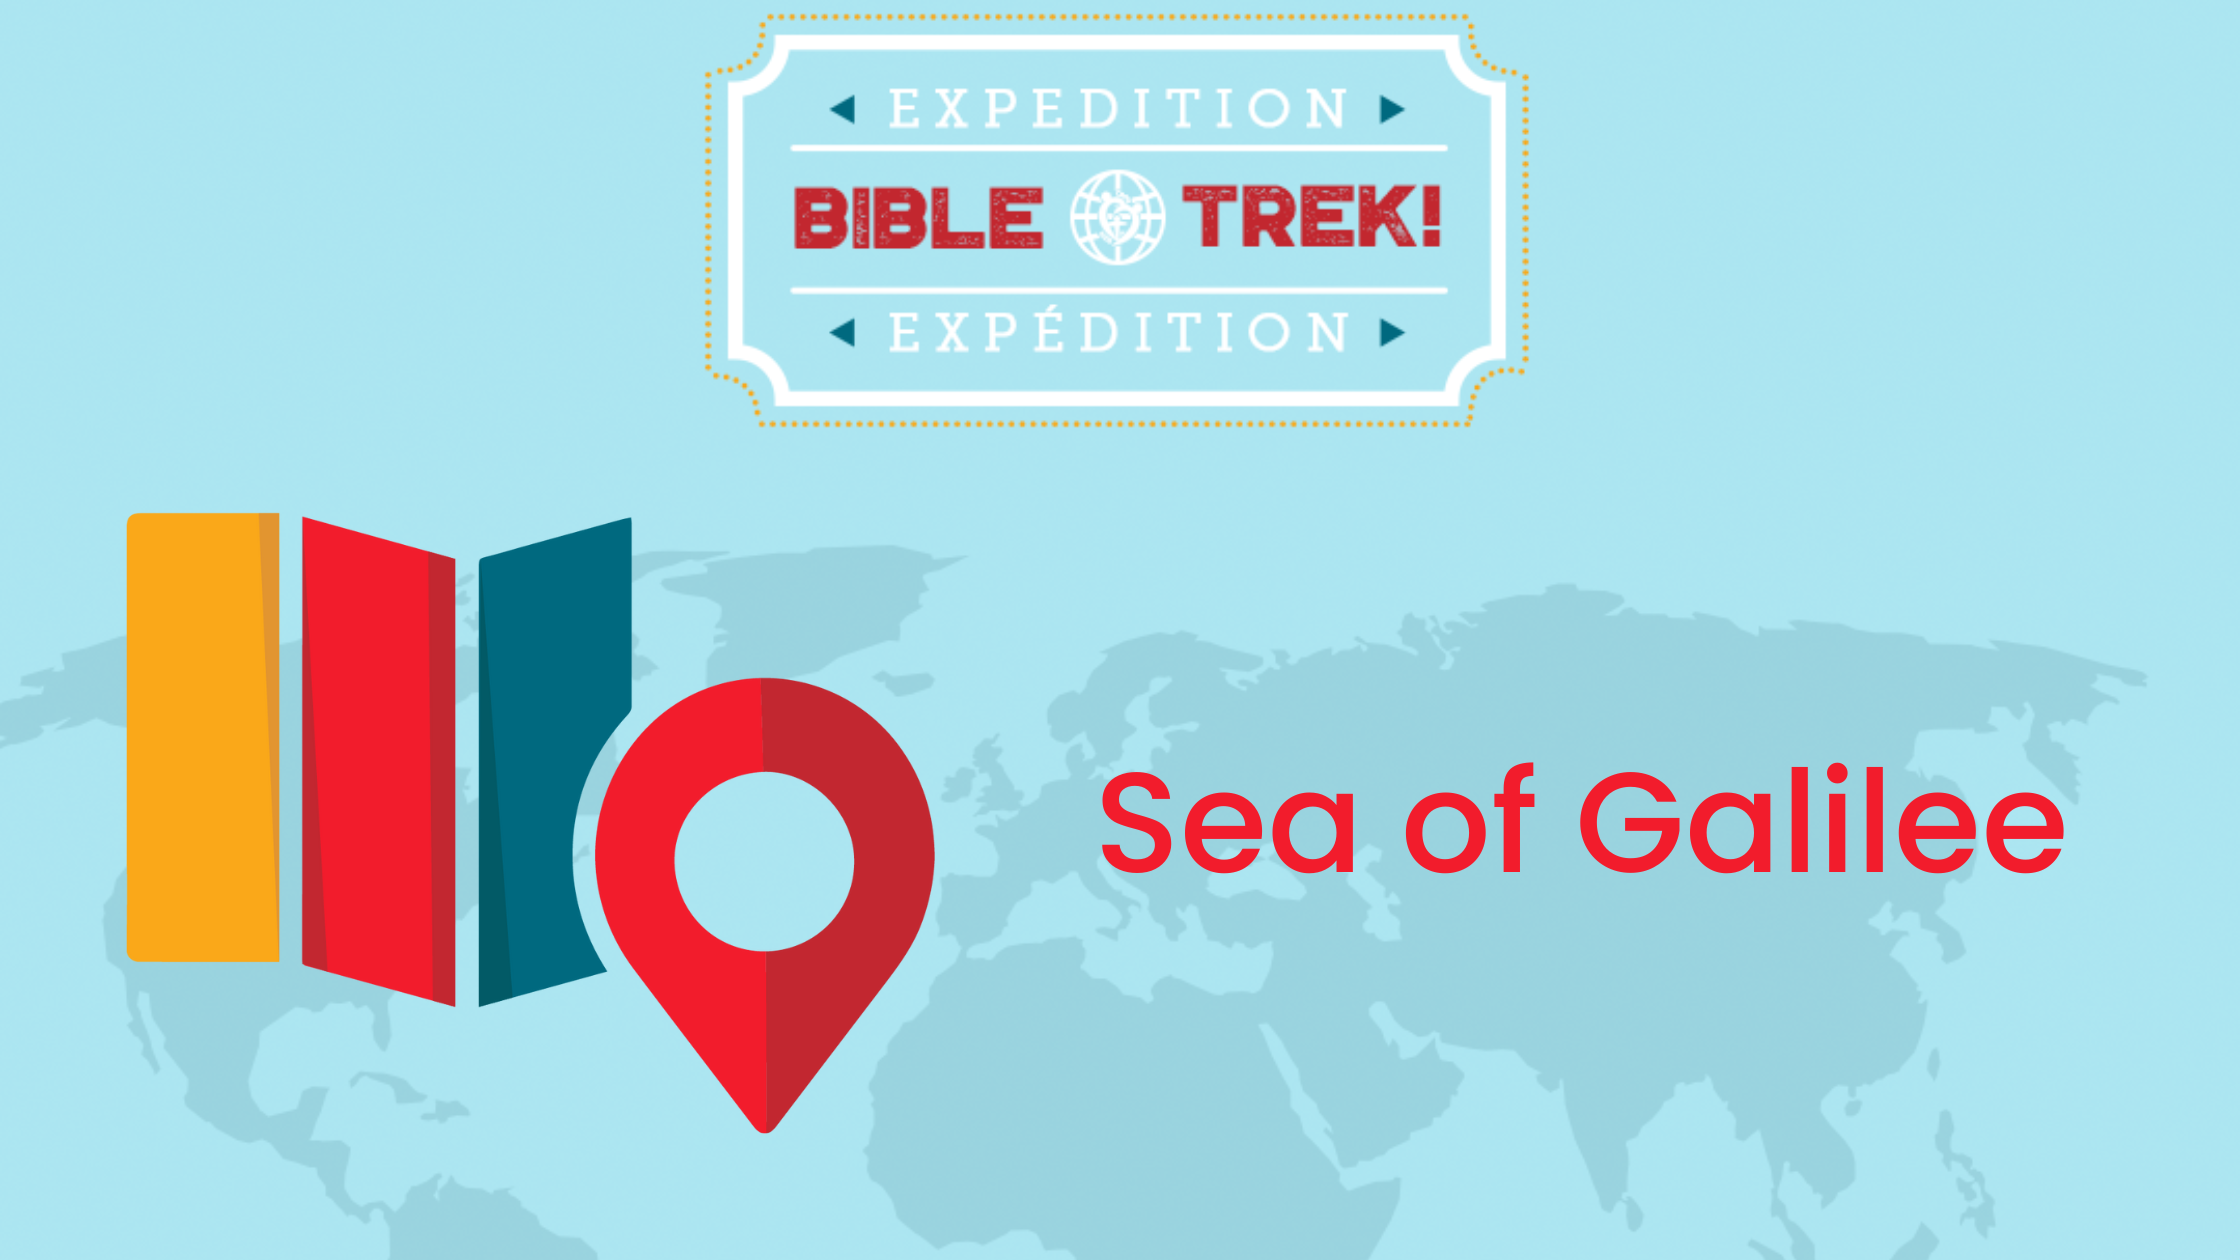 Let's Go to the Sea of Galilee! - CBOQ Kids